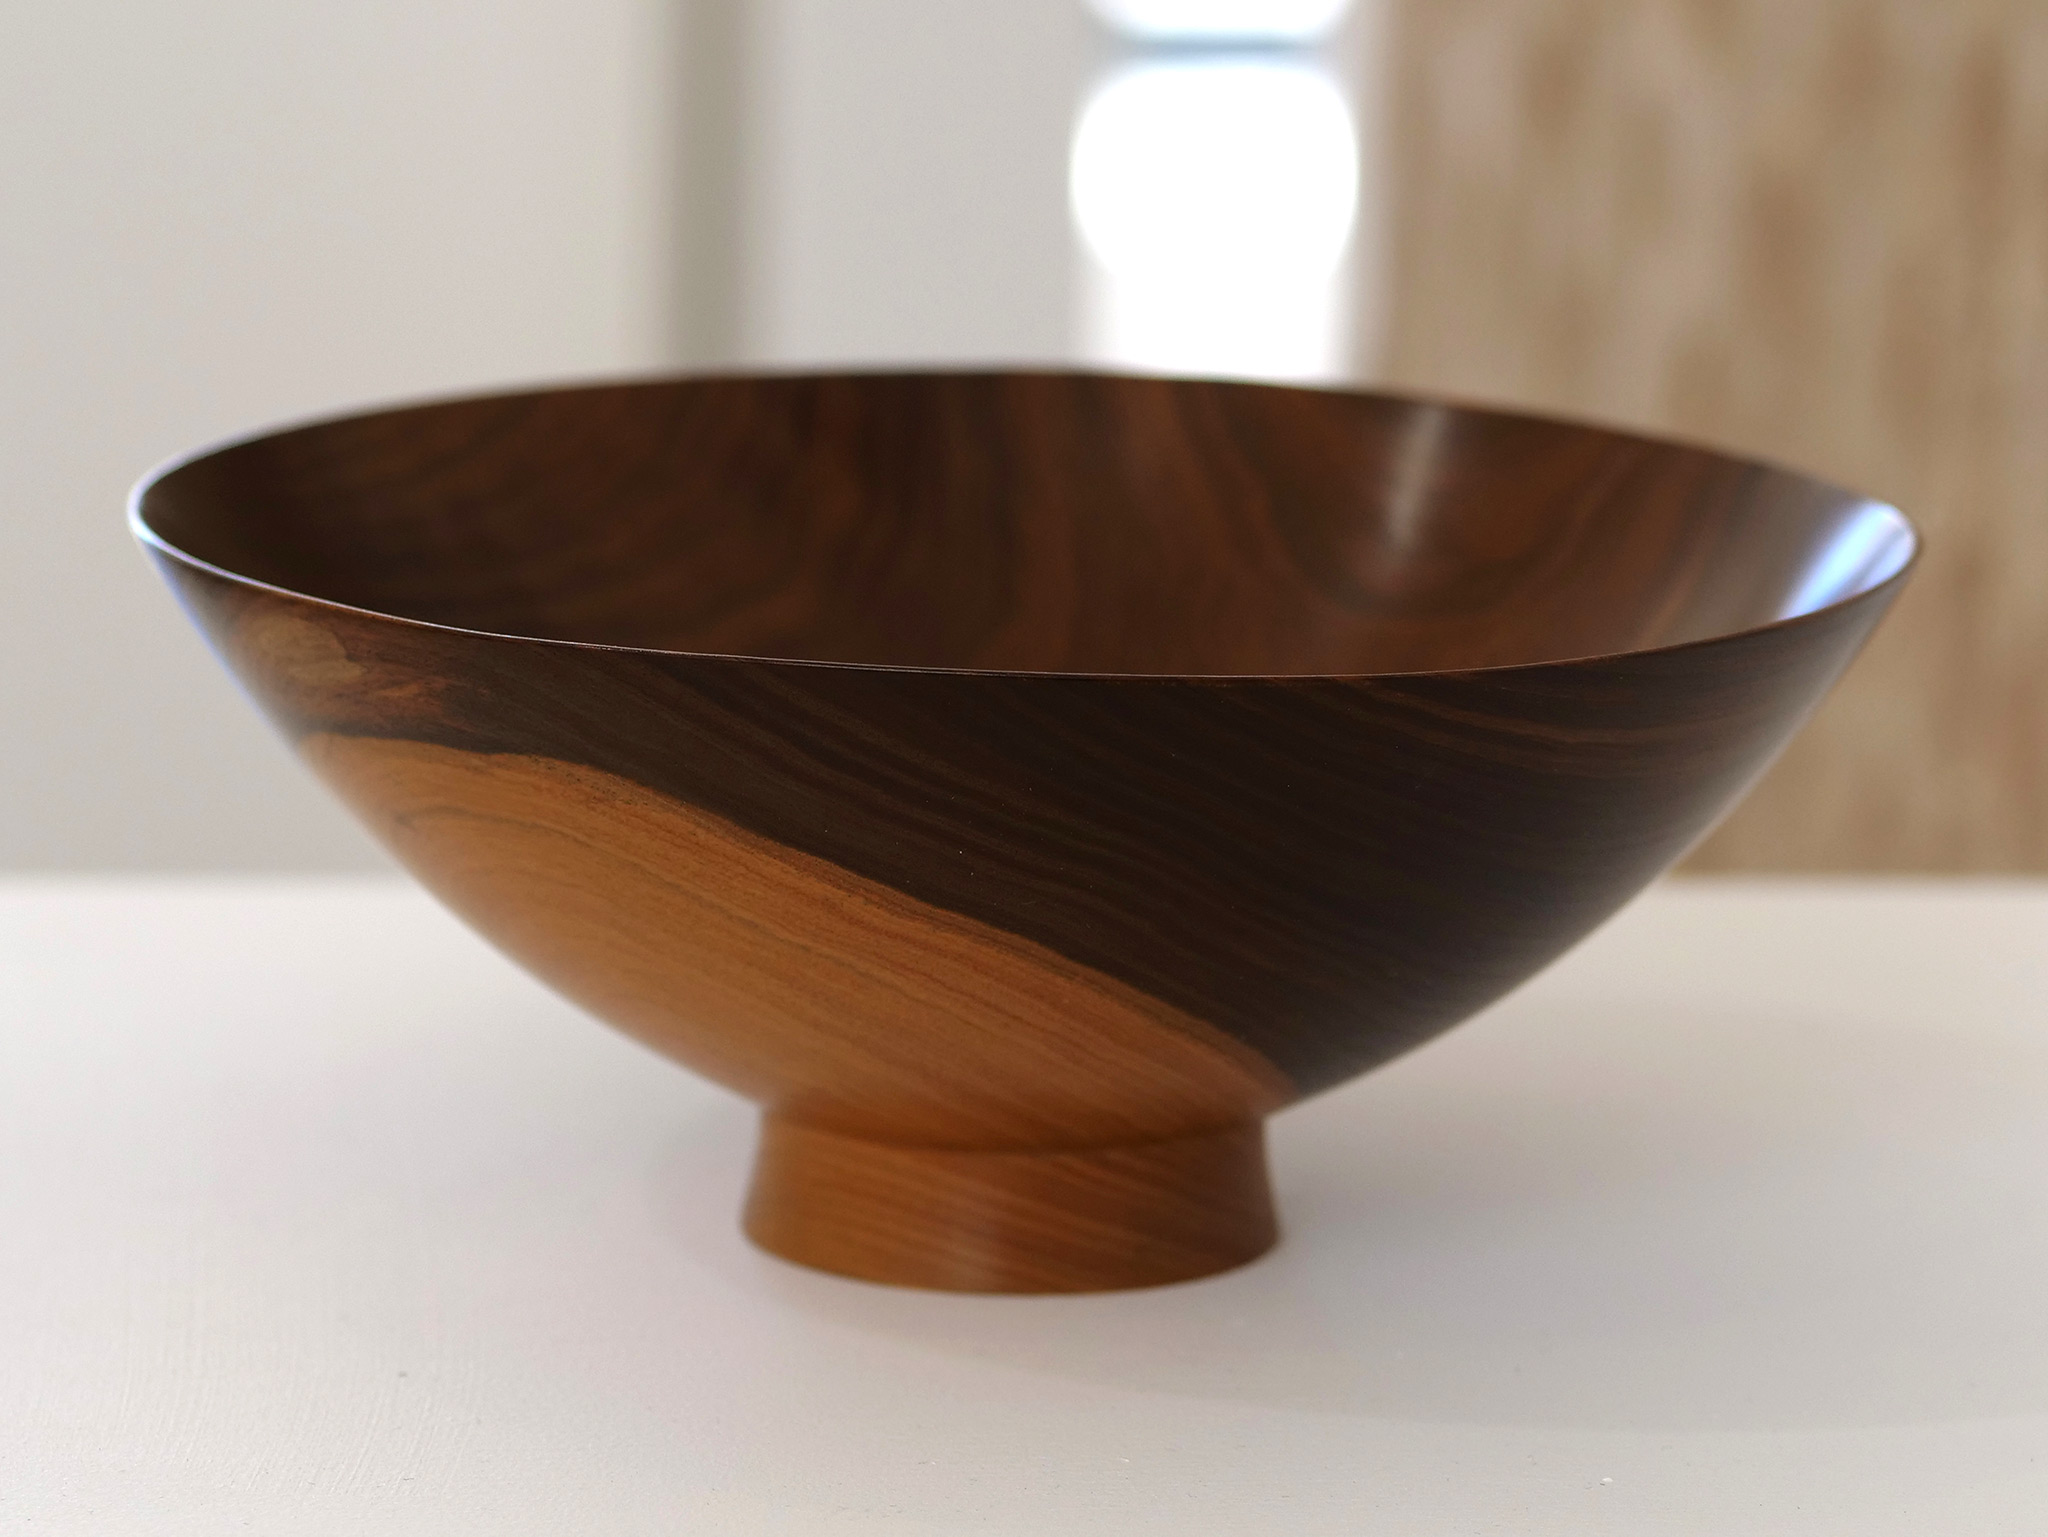 Bob Stocksdale, Bowl, Turned wood, 1974, California Visionaries: Seminal Studio Craft, Featuring Works from the Forrest L. Merrill Collection, Craft in America